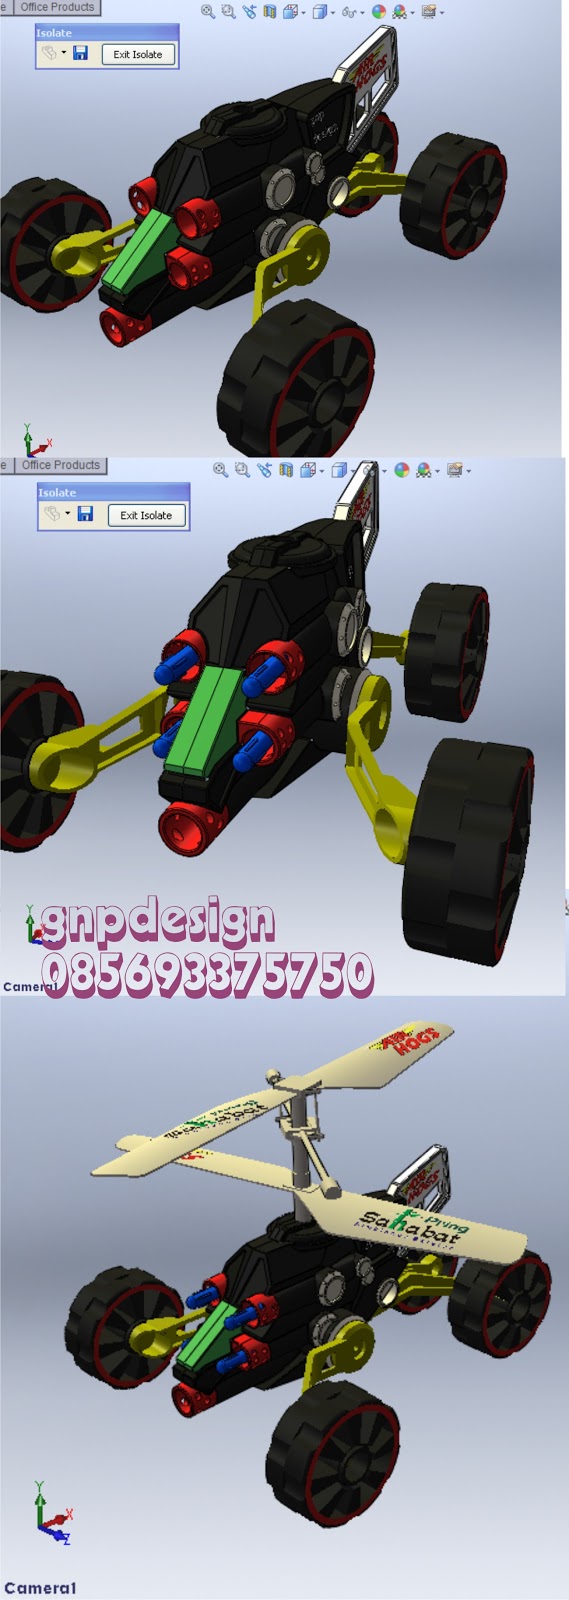 Gnp design: RC (Remote Control) Solidworks 3D modeling and 